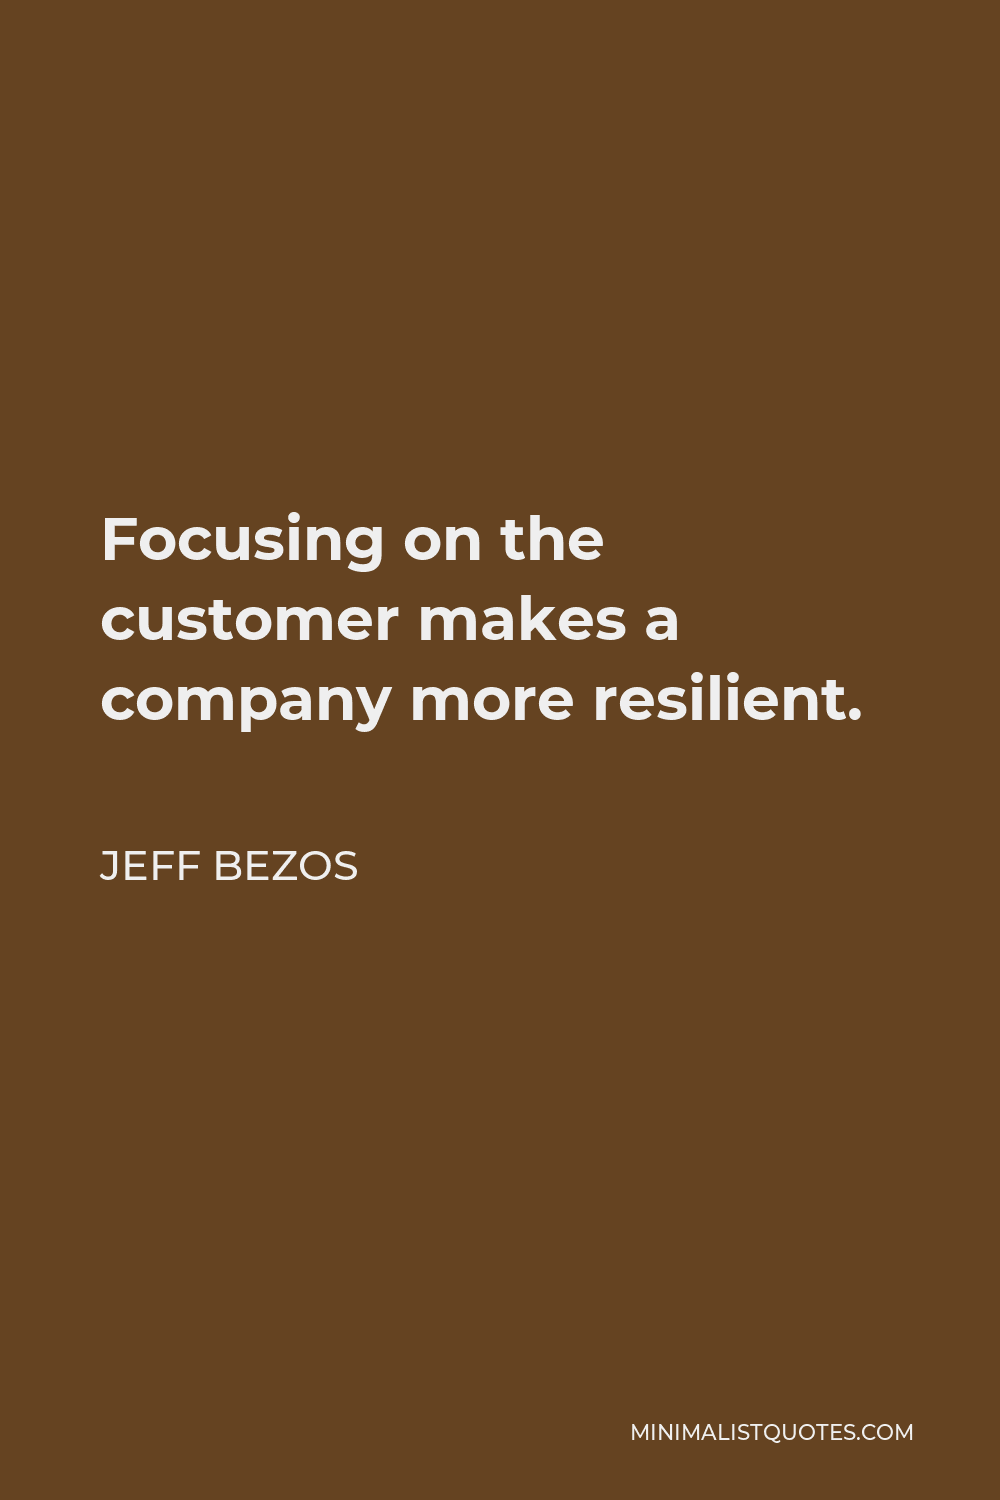 Jeff Bezos Quote - Focusing on the customer makes a company more resilient.